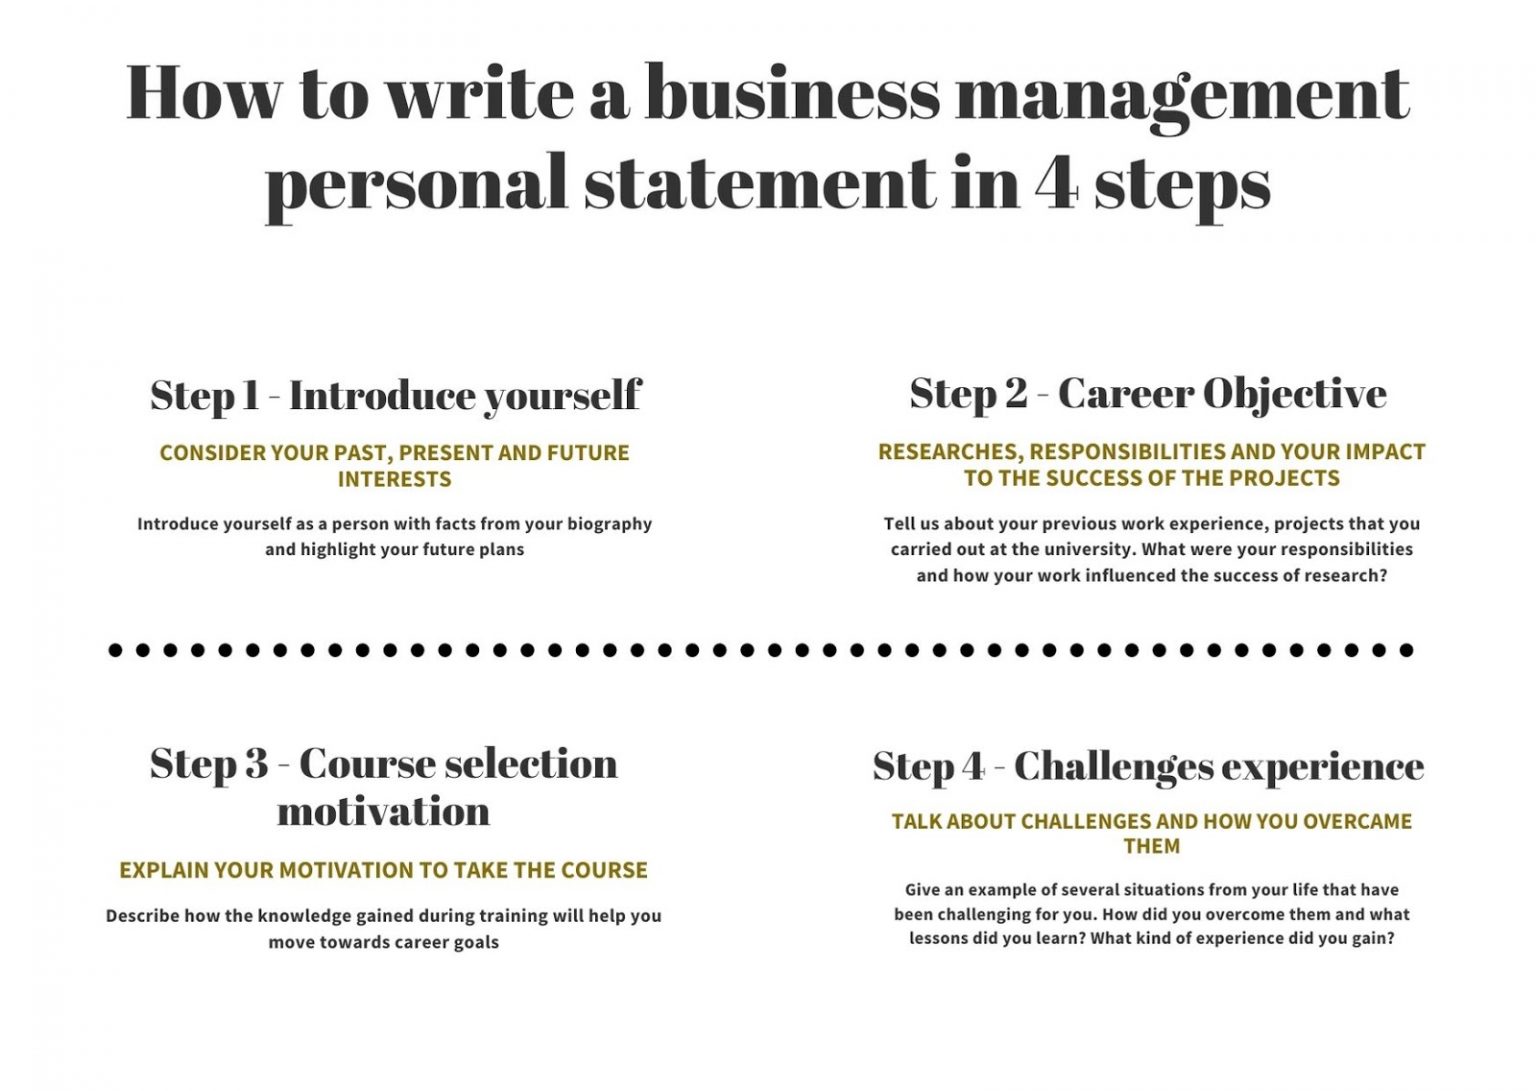 tips for writing a personal statement for business